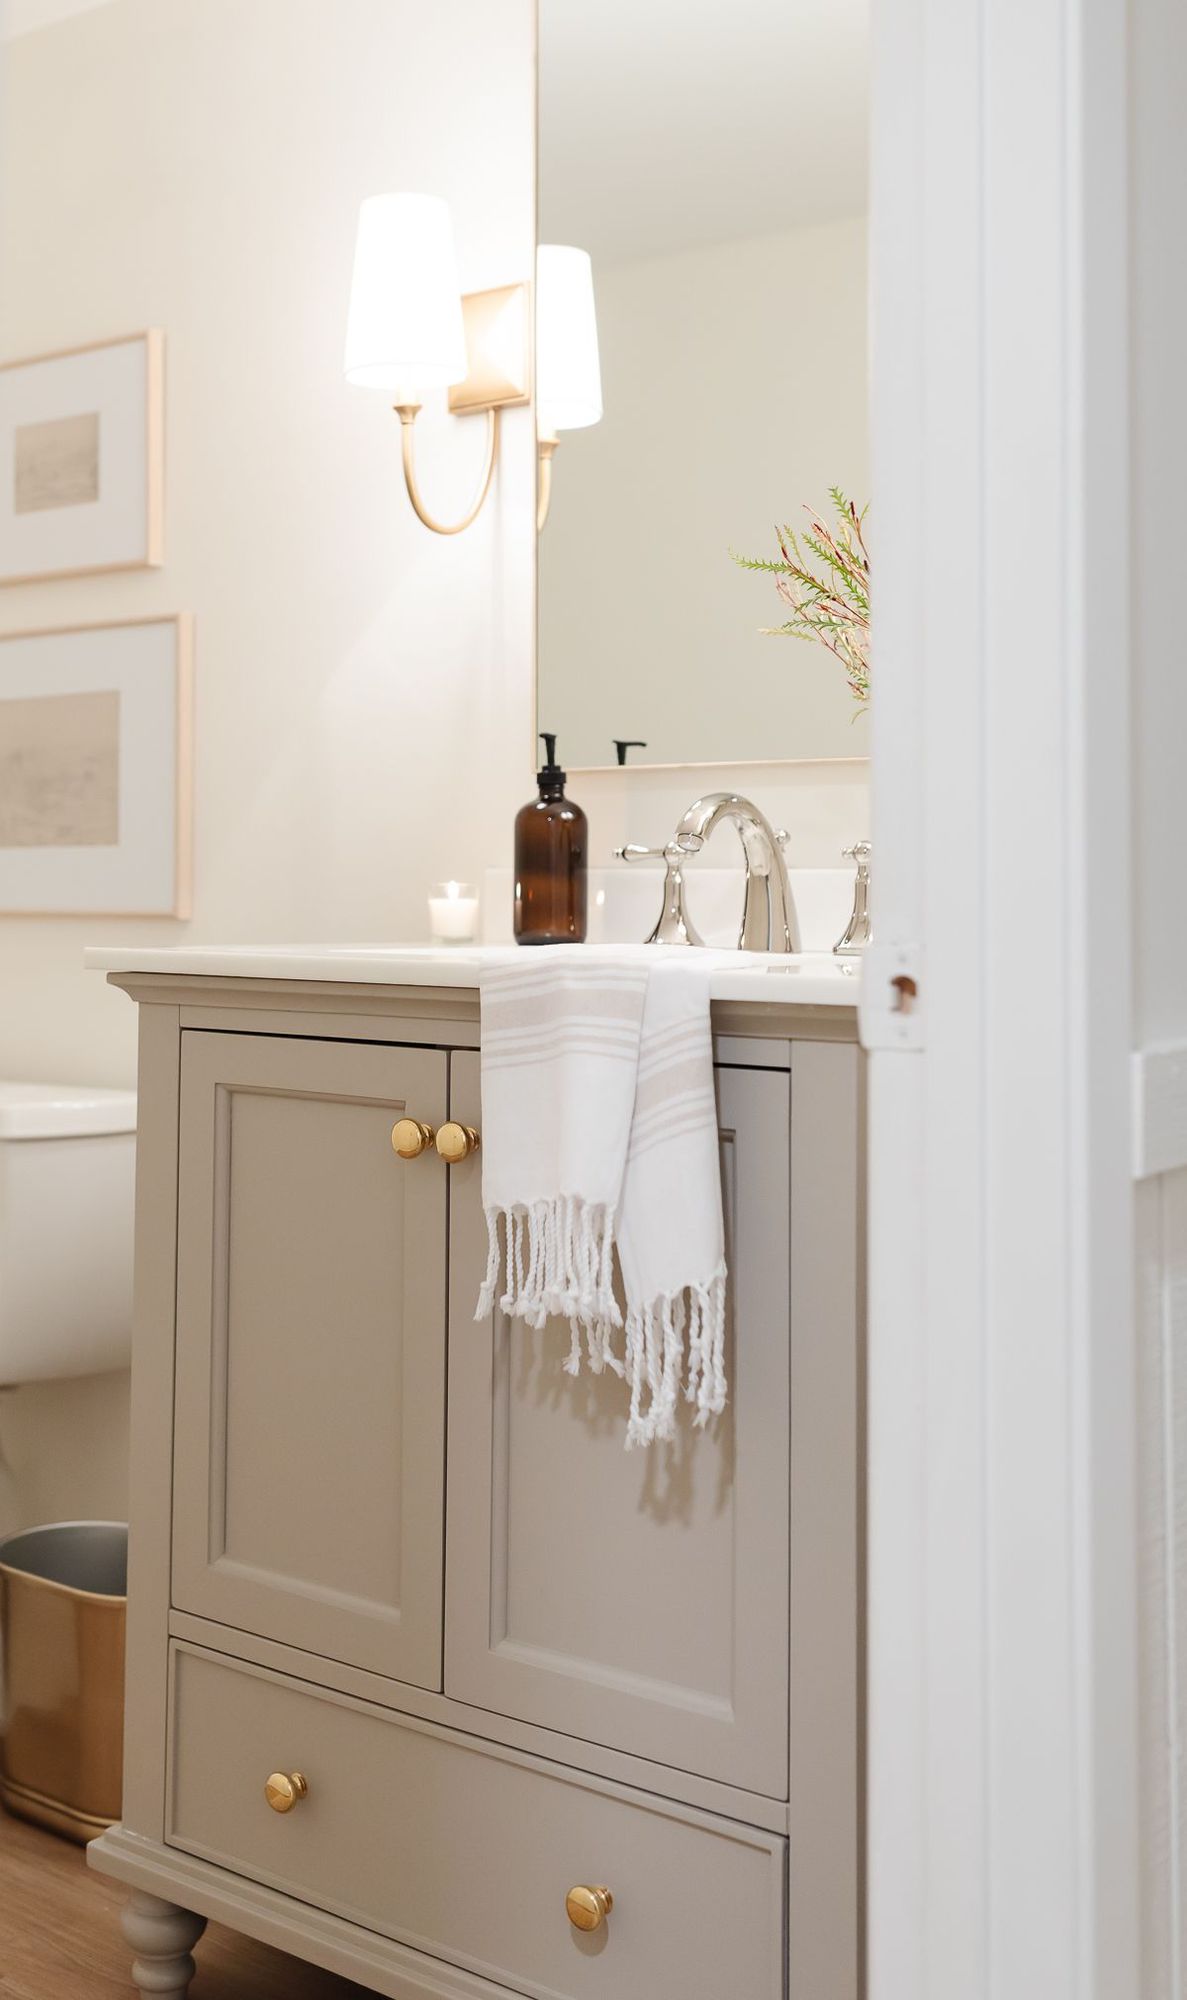 A basement bathroom with a greige painted vanity cabinet and gold sconces